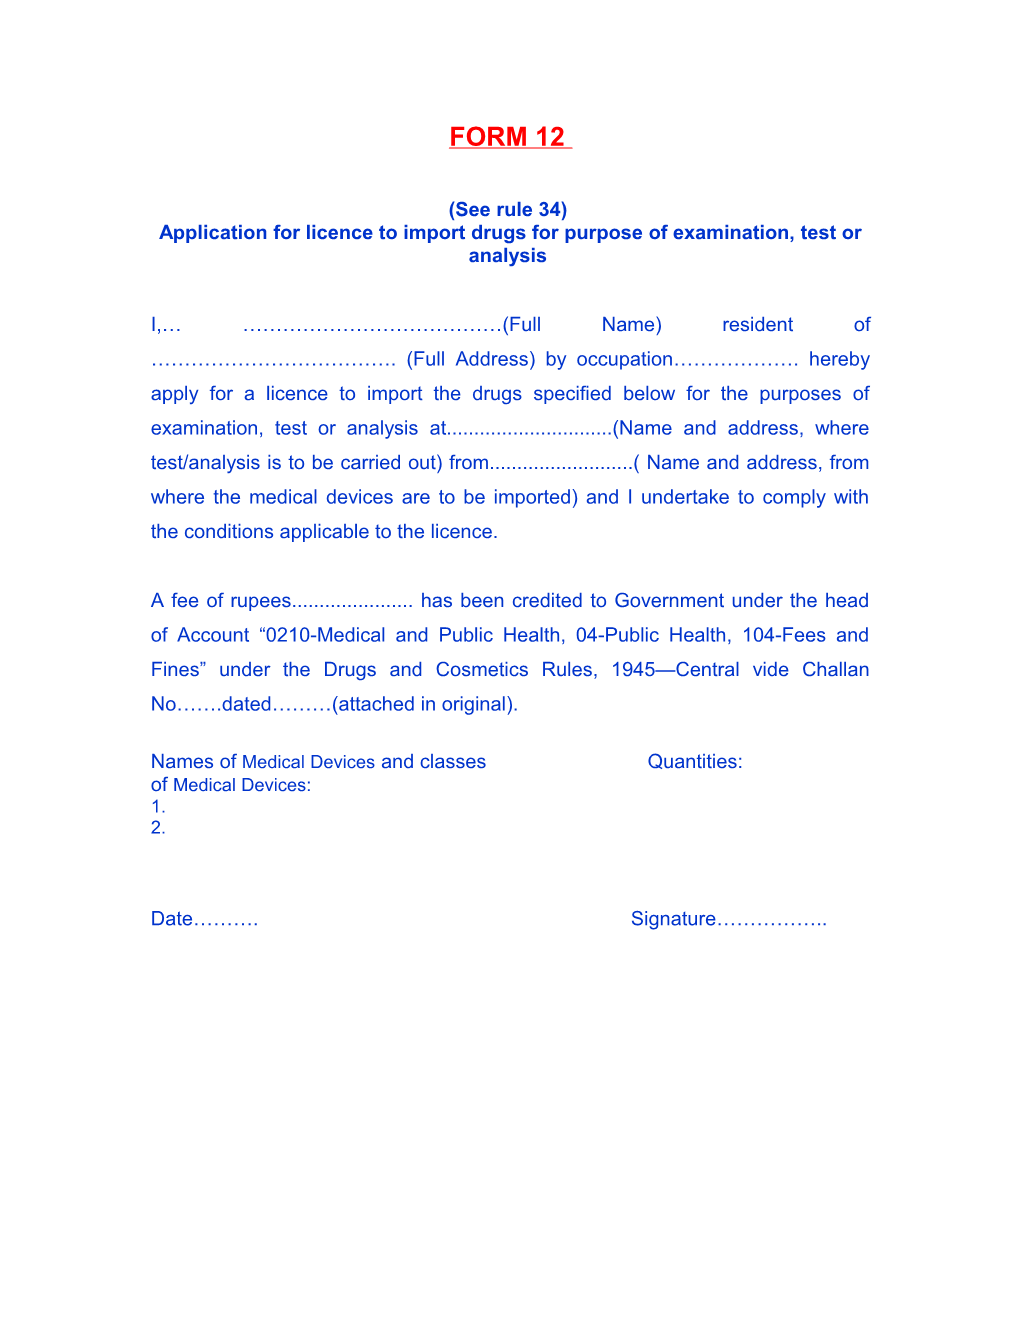 Guidance Document Cum Checklist for the Registration of Medical Devices for Import Into India